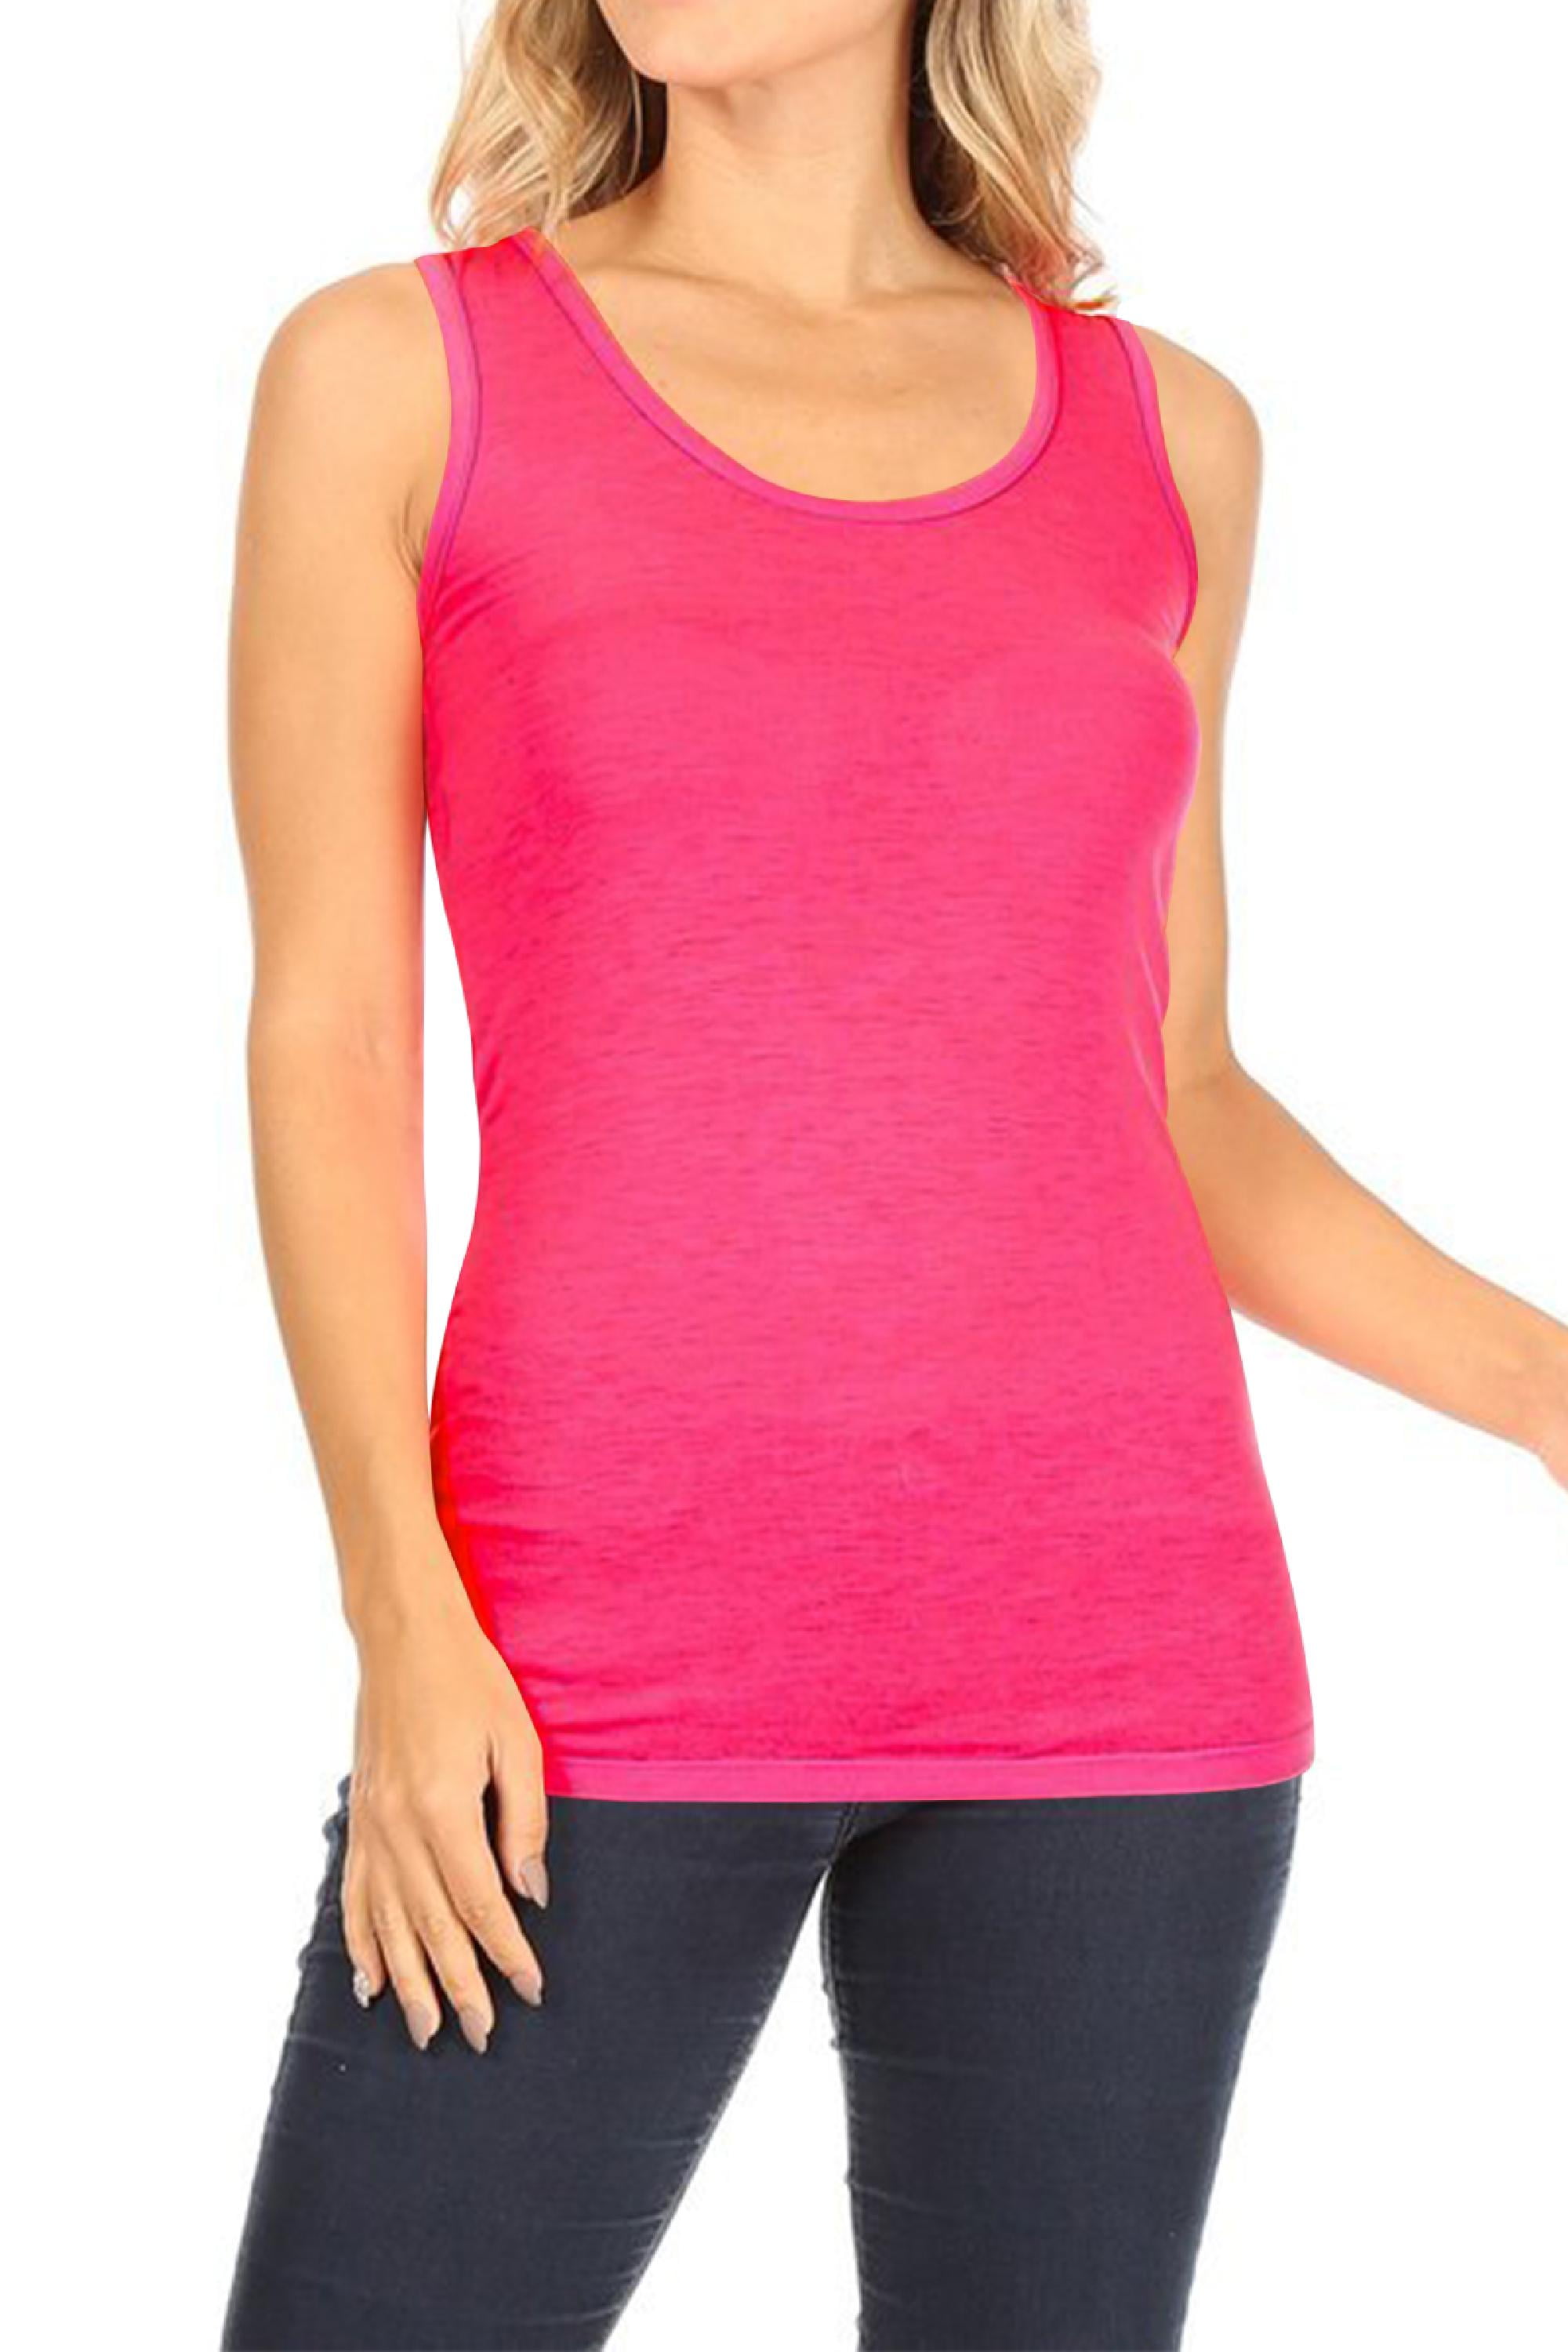 Women's Lightweight Casual Sleeveless Scoop Neck Solid Basic Camisole Tank Top